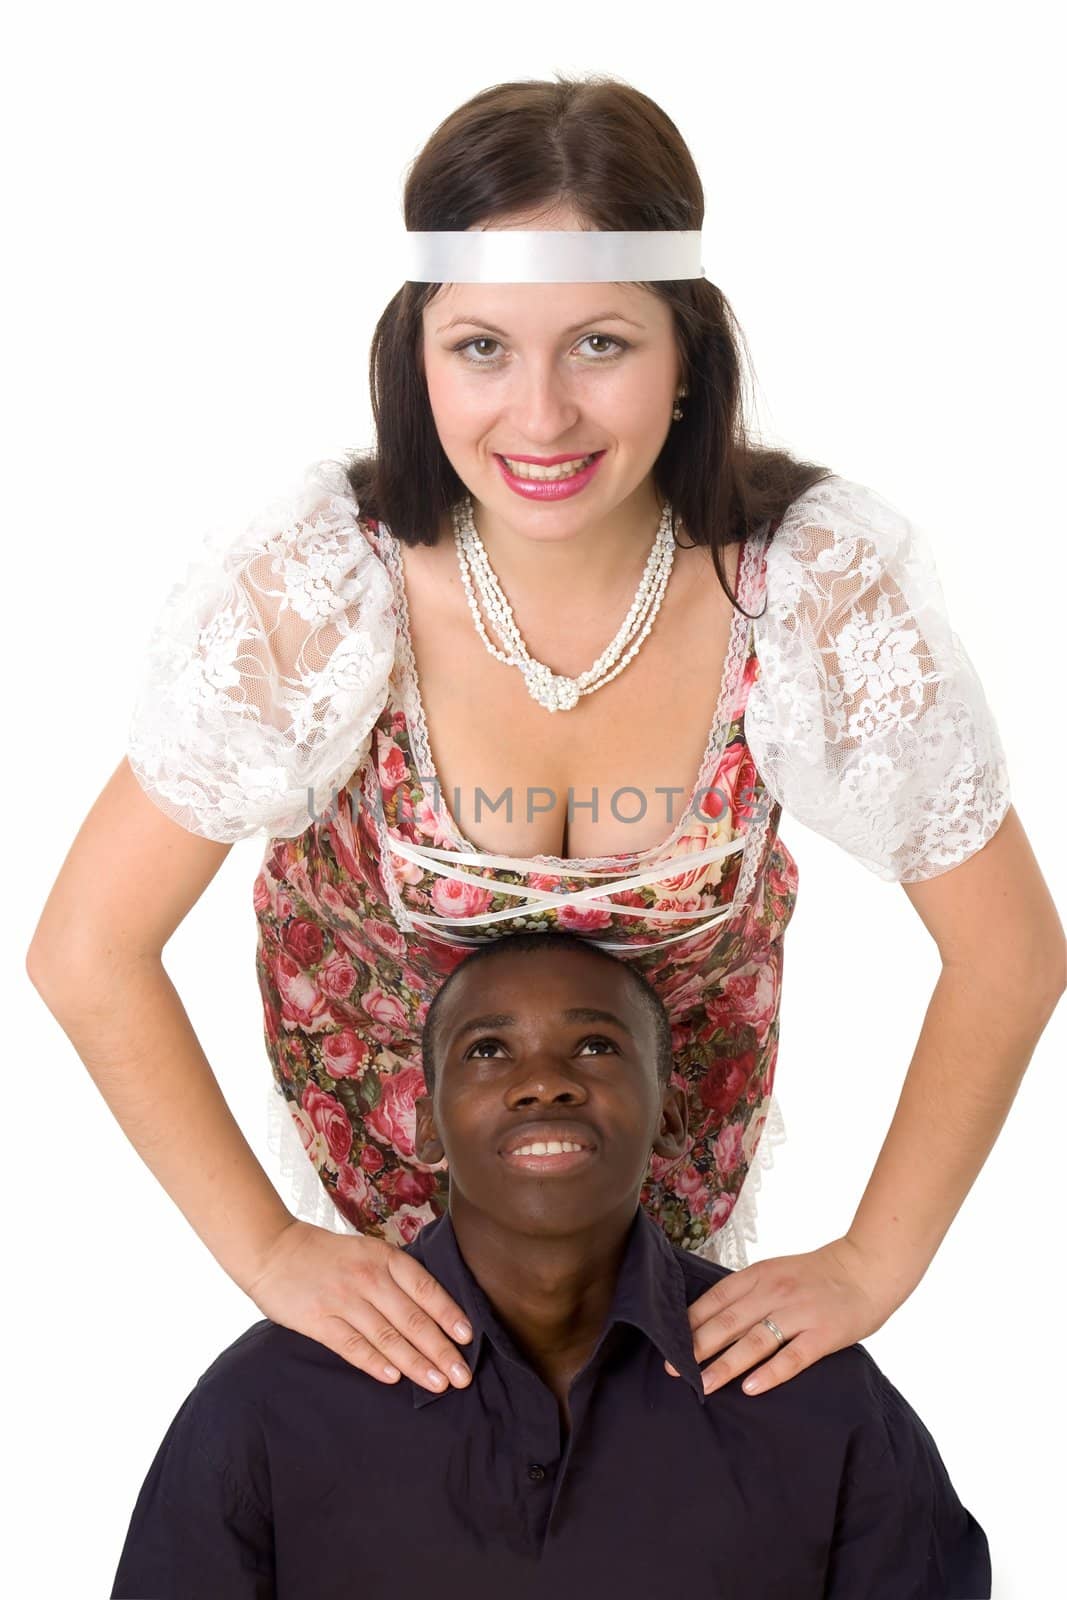 Black man and white woman on a white background.